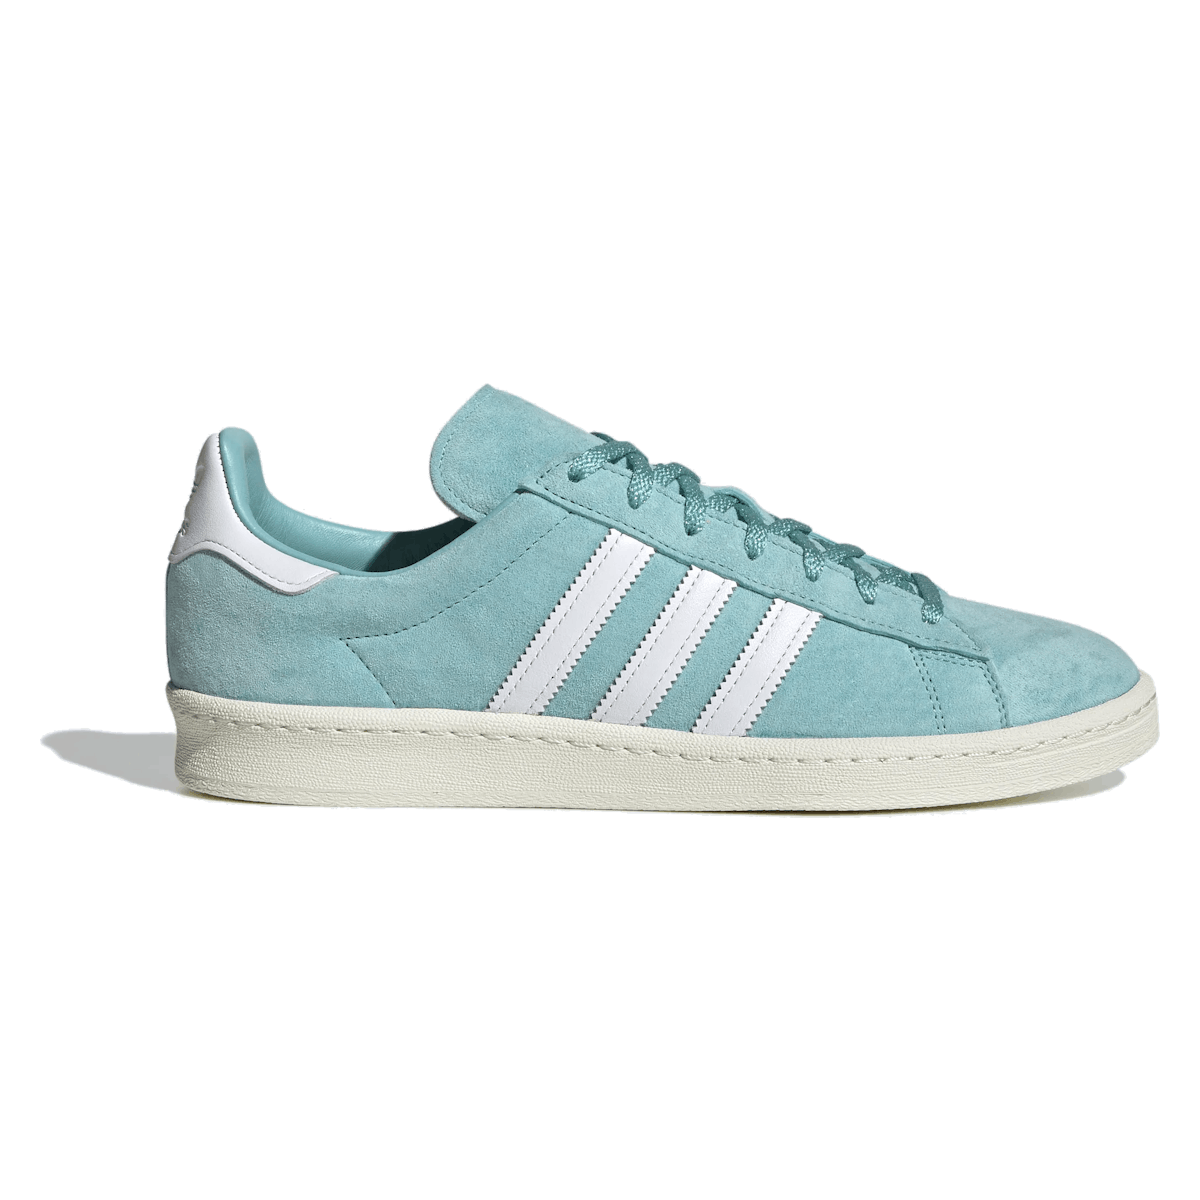 Adidas Campus 80s "Easy Mint"